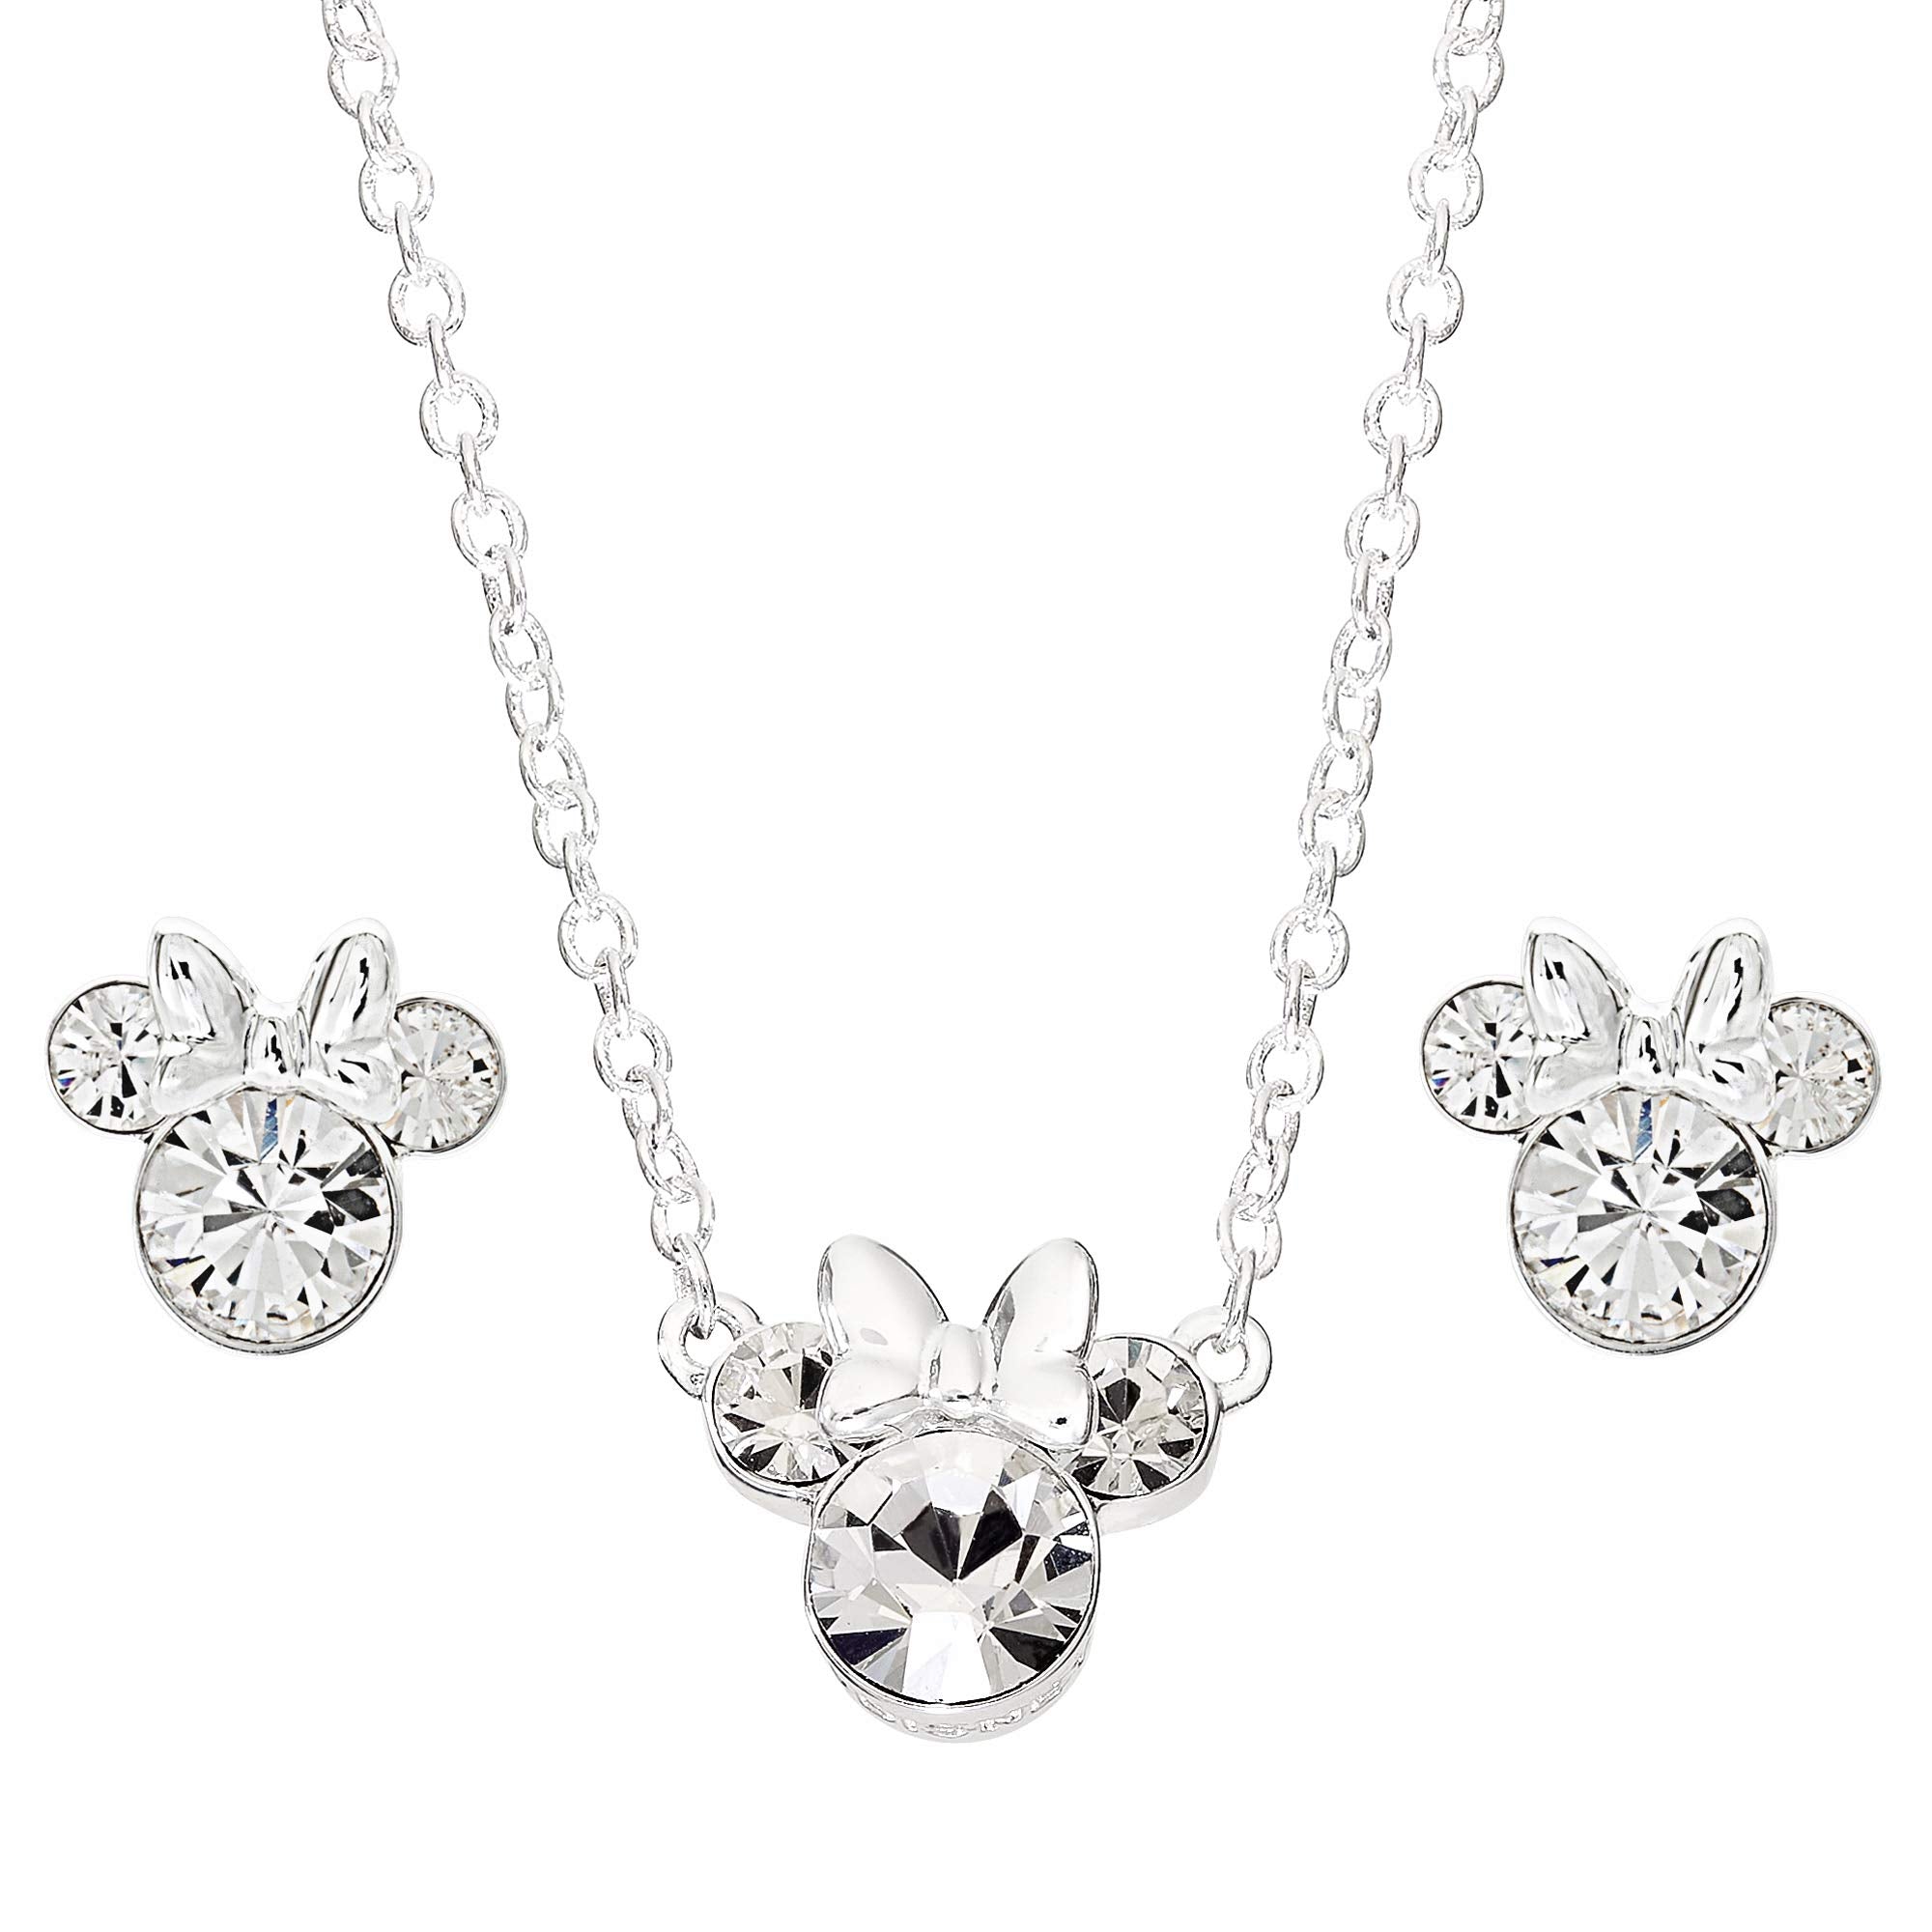 Disney Minnie Mouse Crystal Stud Earrings and Necklace Silver Plated Jewelry Set (More Colors)